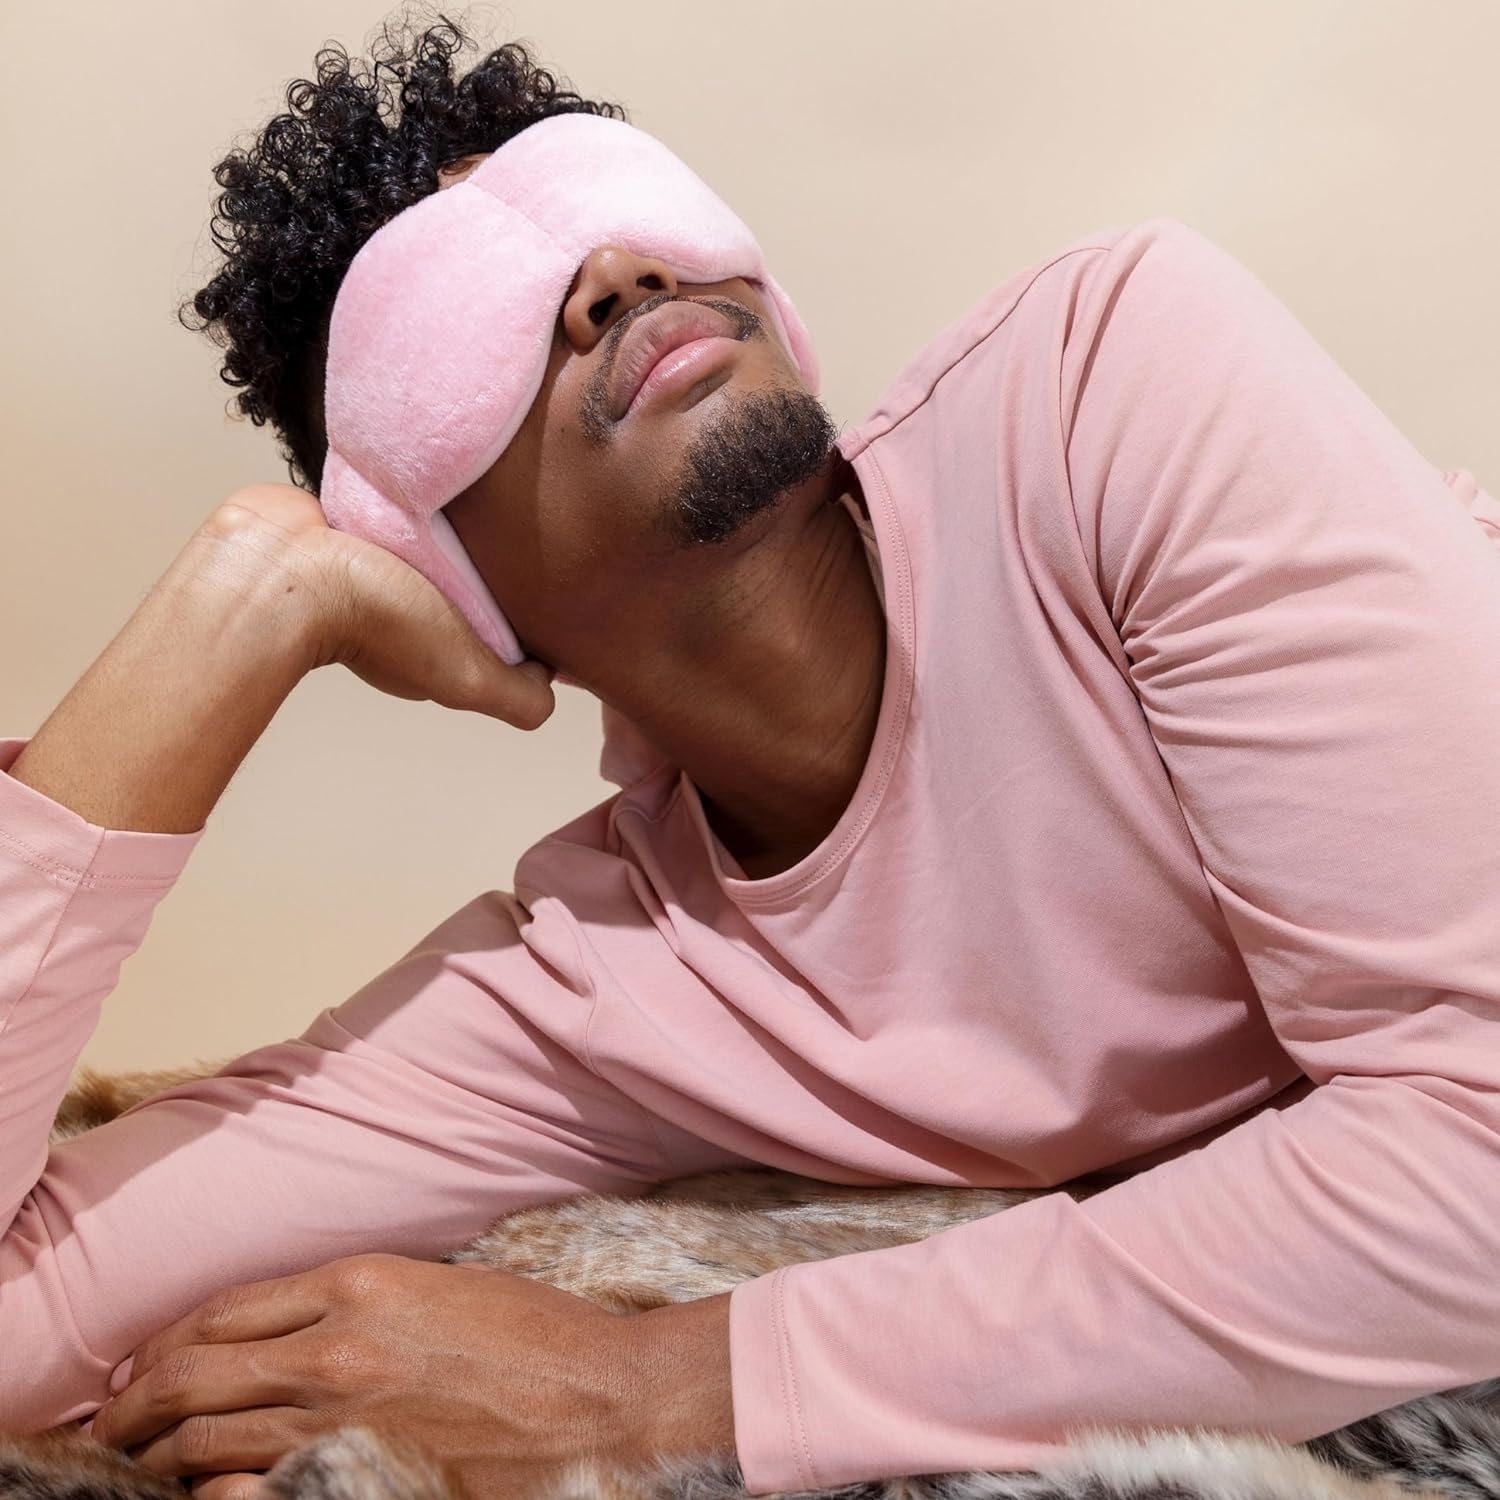 Person wearing a pink sleep mask and shirt resting head on hand, lying on a textured surface